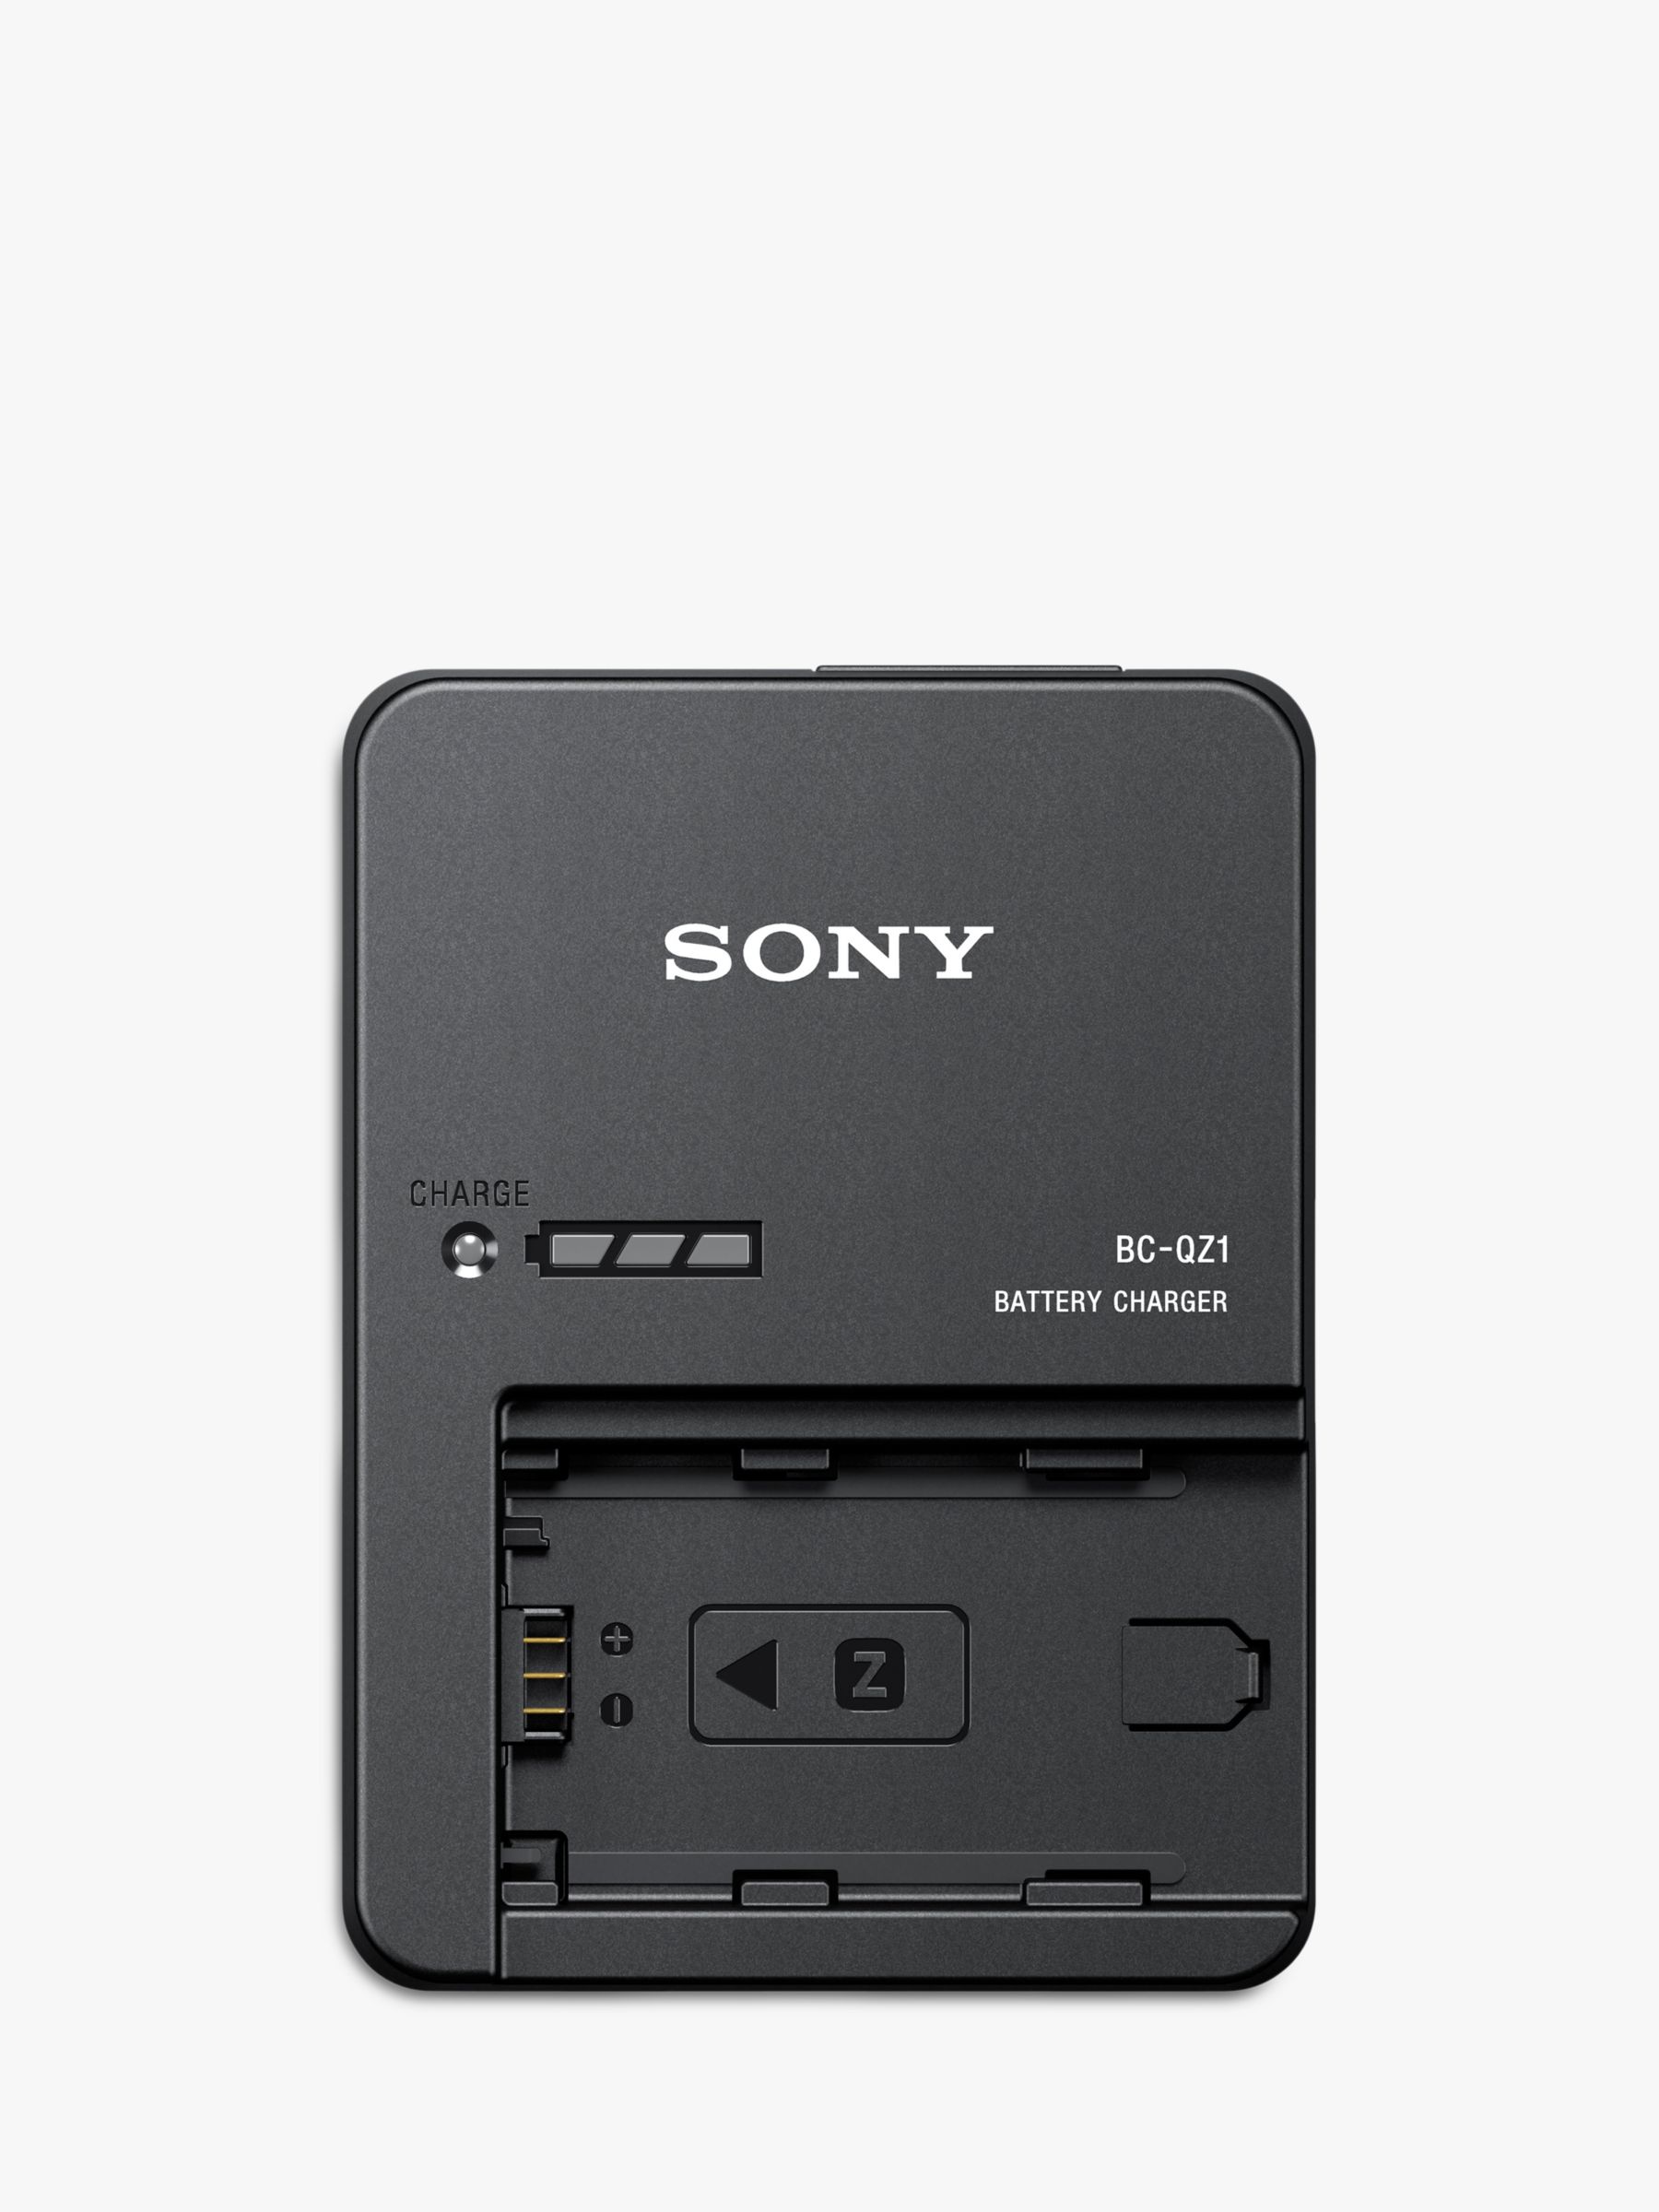 Image of Sony BCQZ1 Battery Charger for NPFZ100